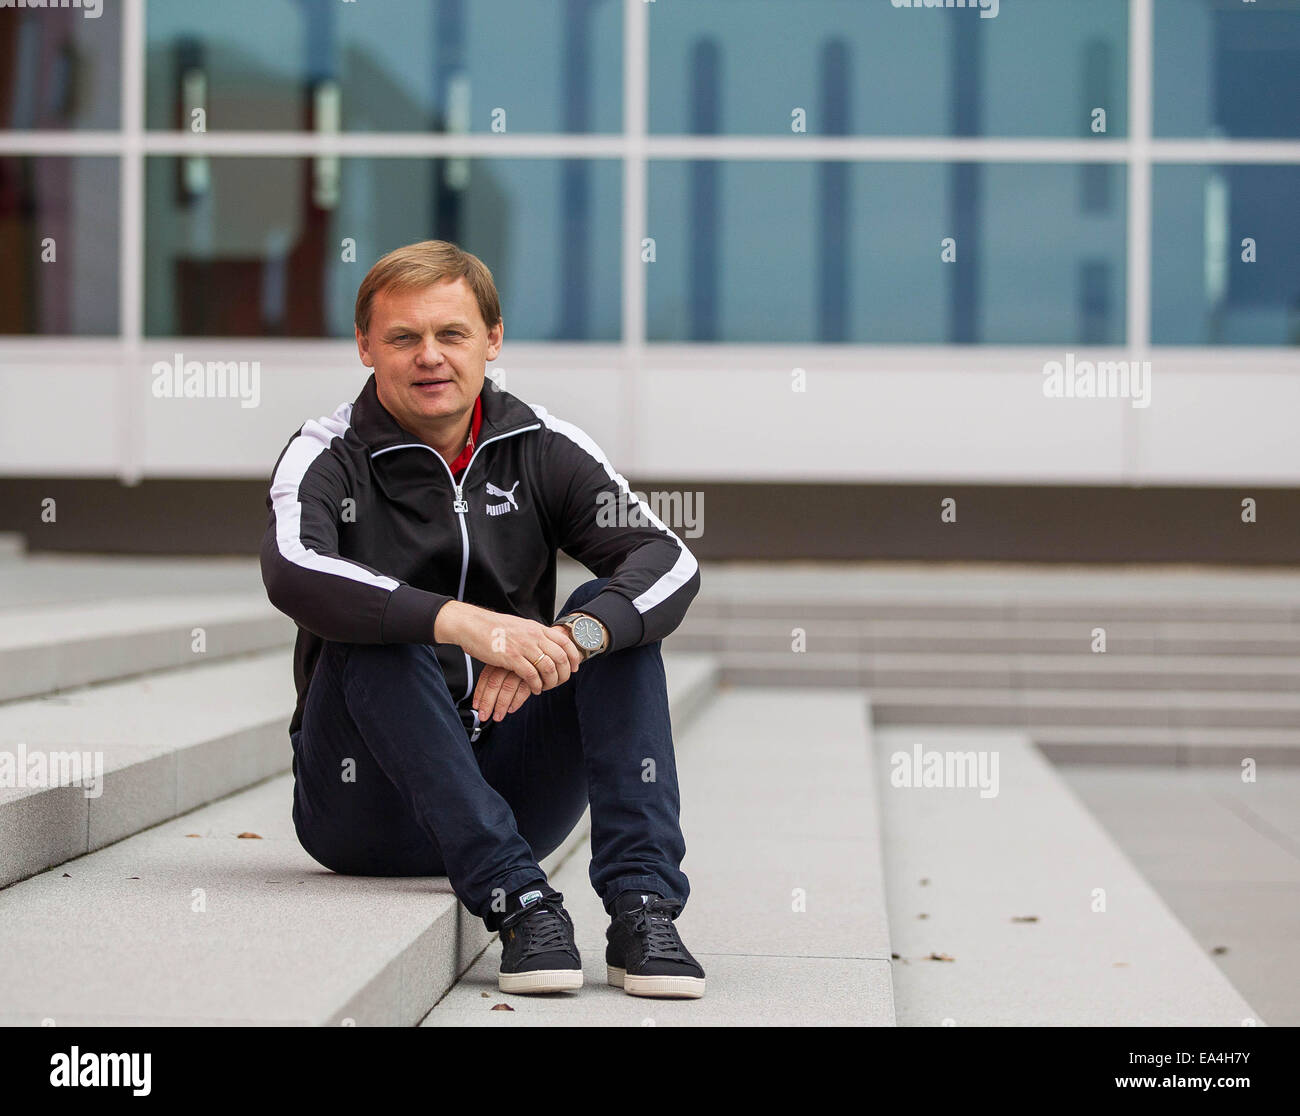 PUMA CEO Bjoern Gulden sitting on a staircase in front of PUMA headquaters  in Herzogenaurach, Germany. COMMERCIAL HANDOUT/EDITORIAL USE ONLY/NO SALES.  Please quote the source "photo: PUMA/Ralf Roedel Stock Photo - Alamy